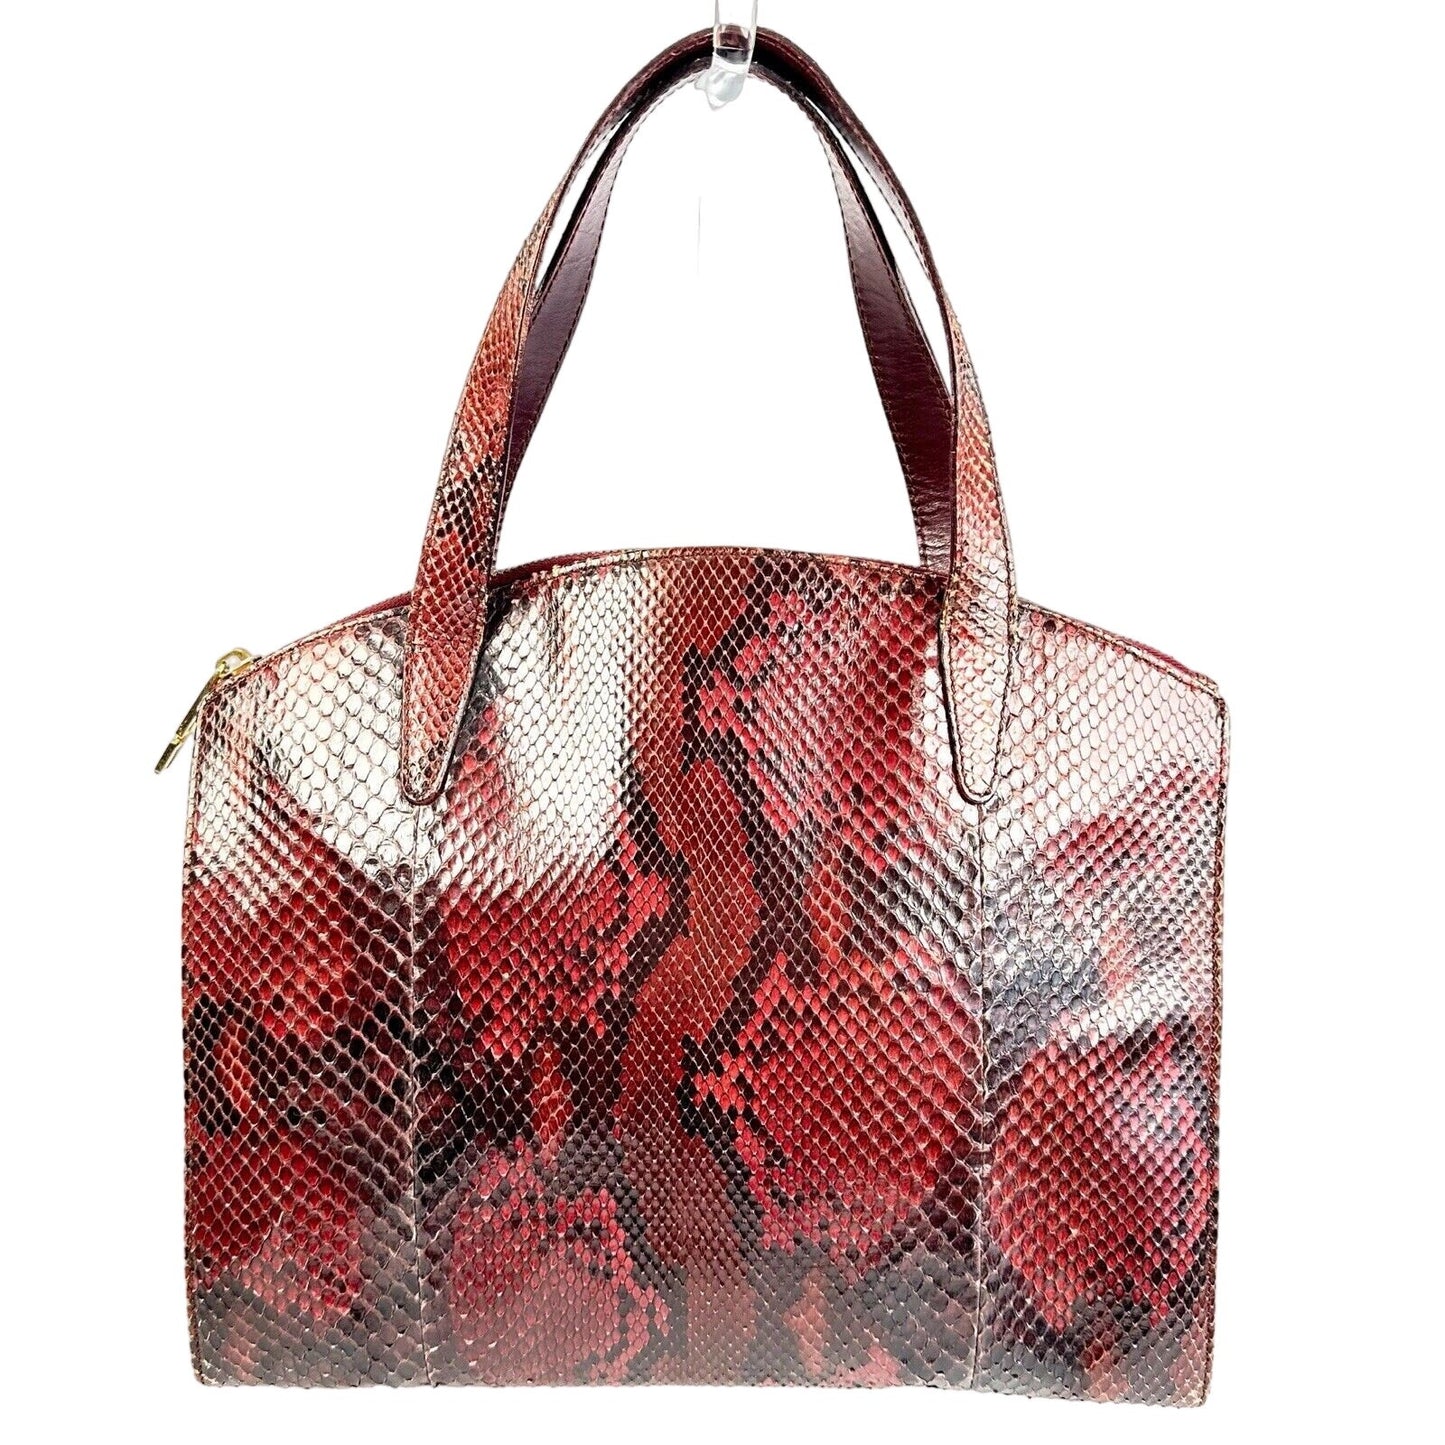 Gucci domed top red grey & burgundy python leather satchel